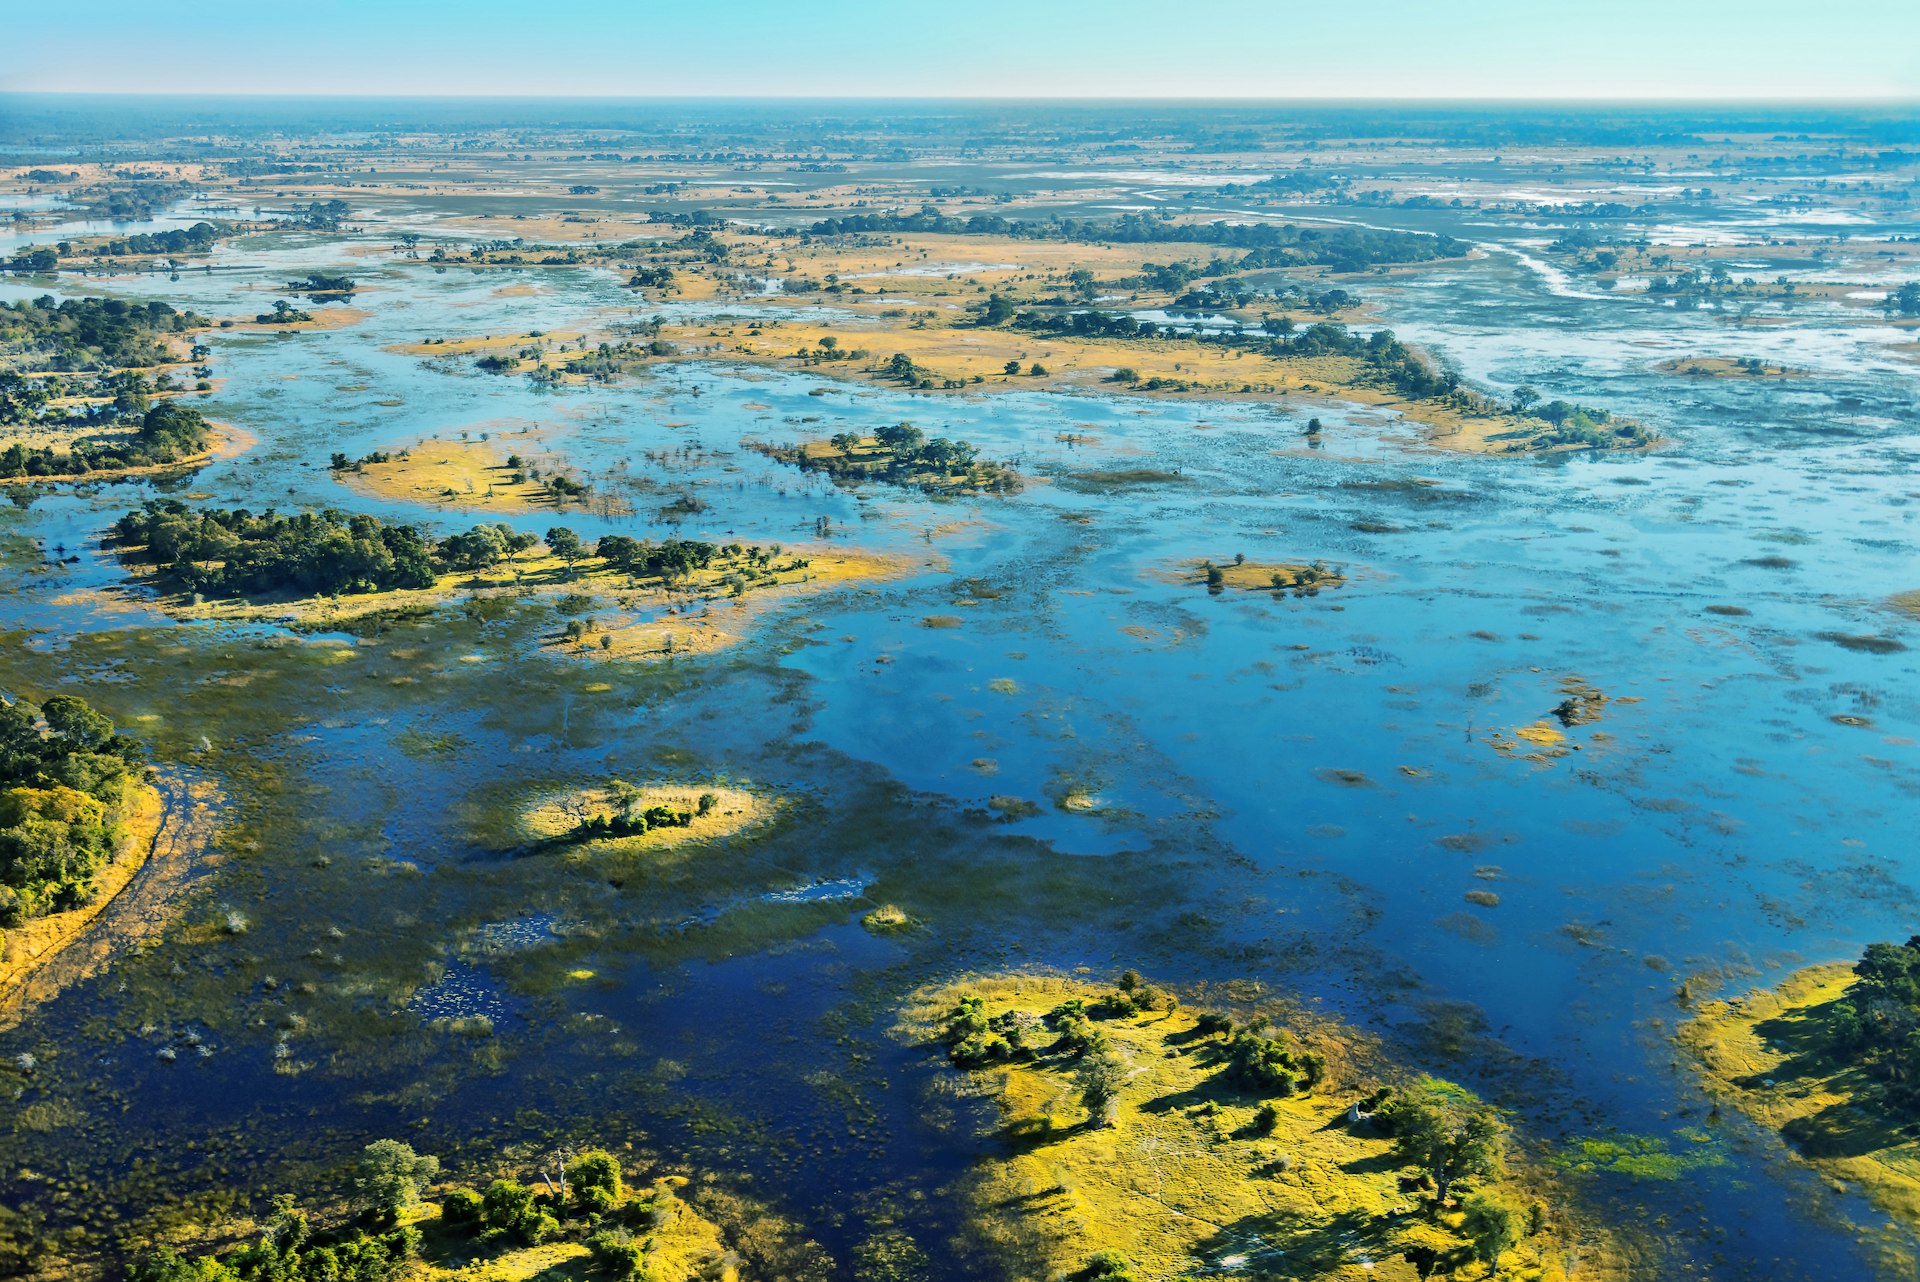 The floodwaters of the Okavango River in Botswana